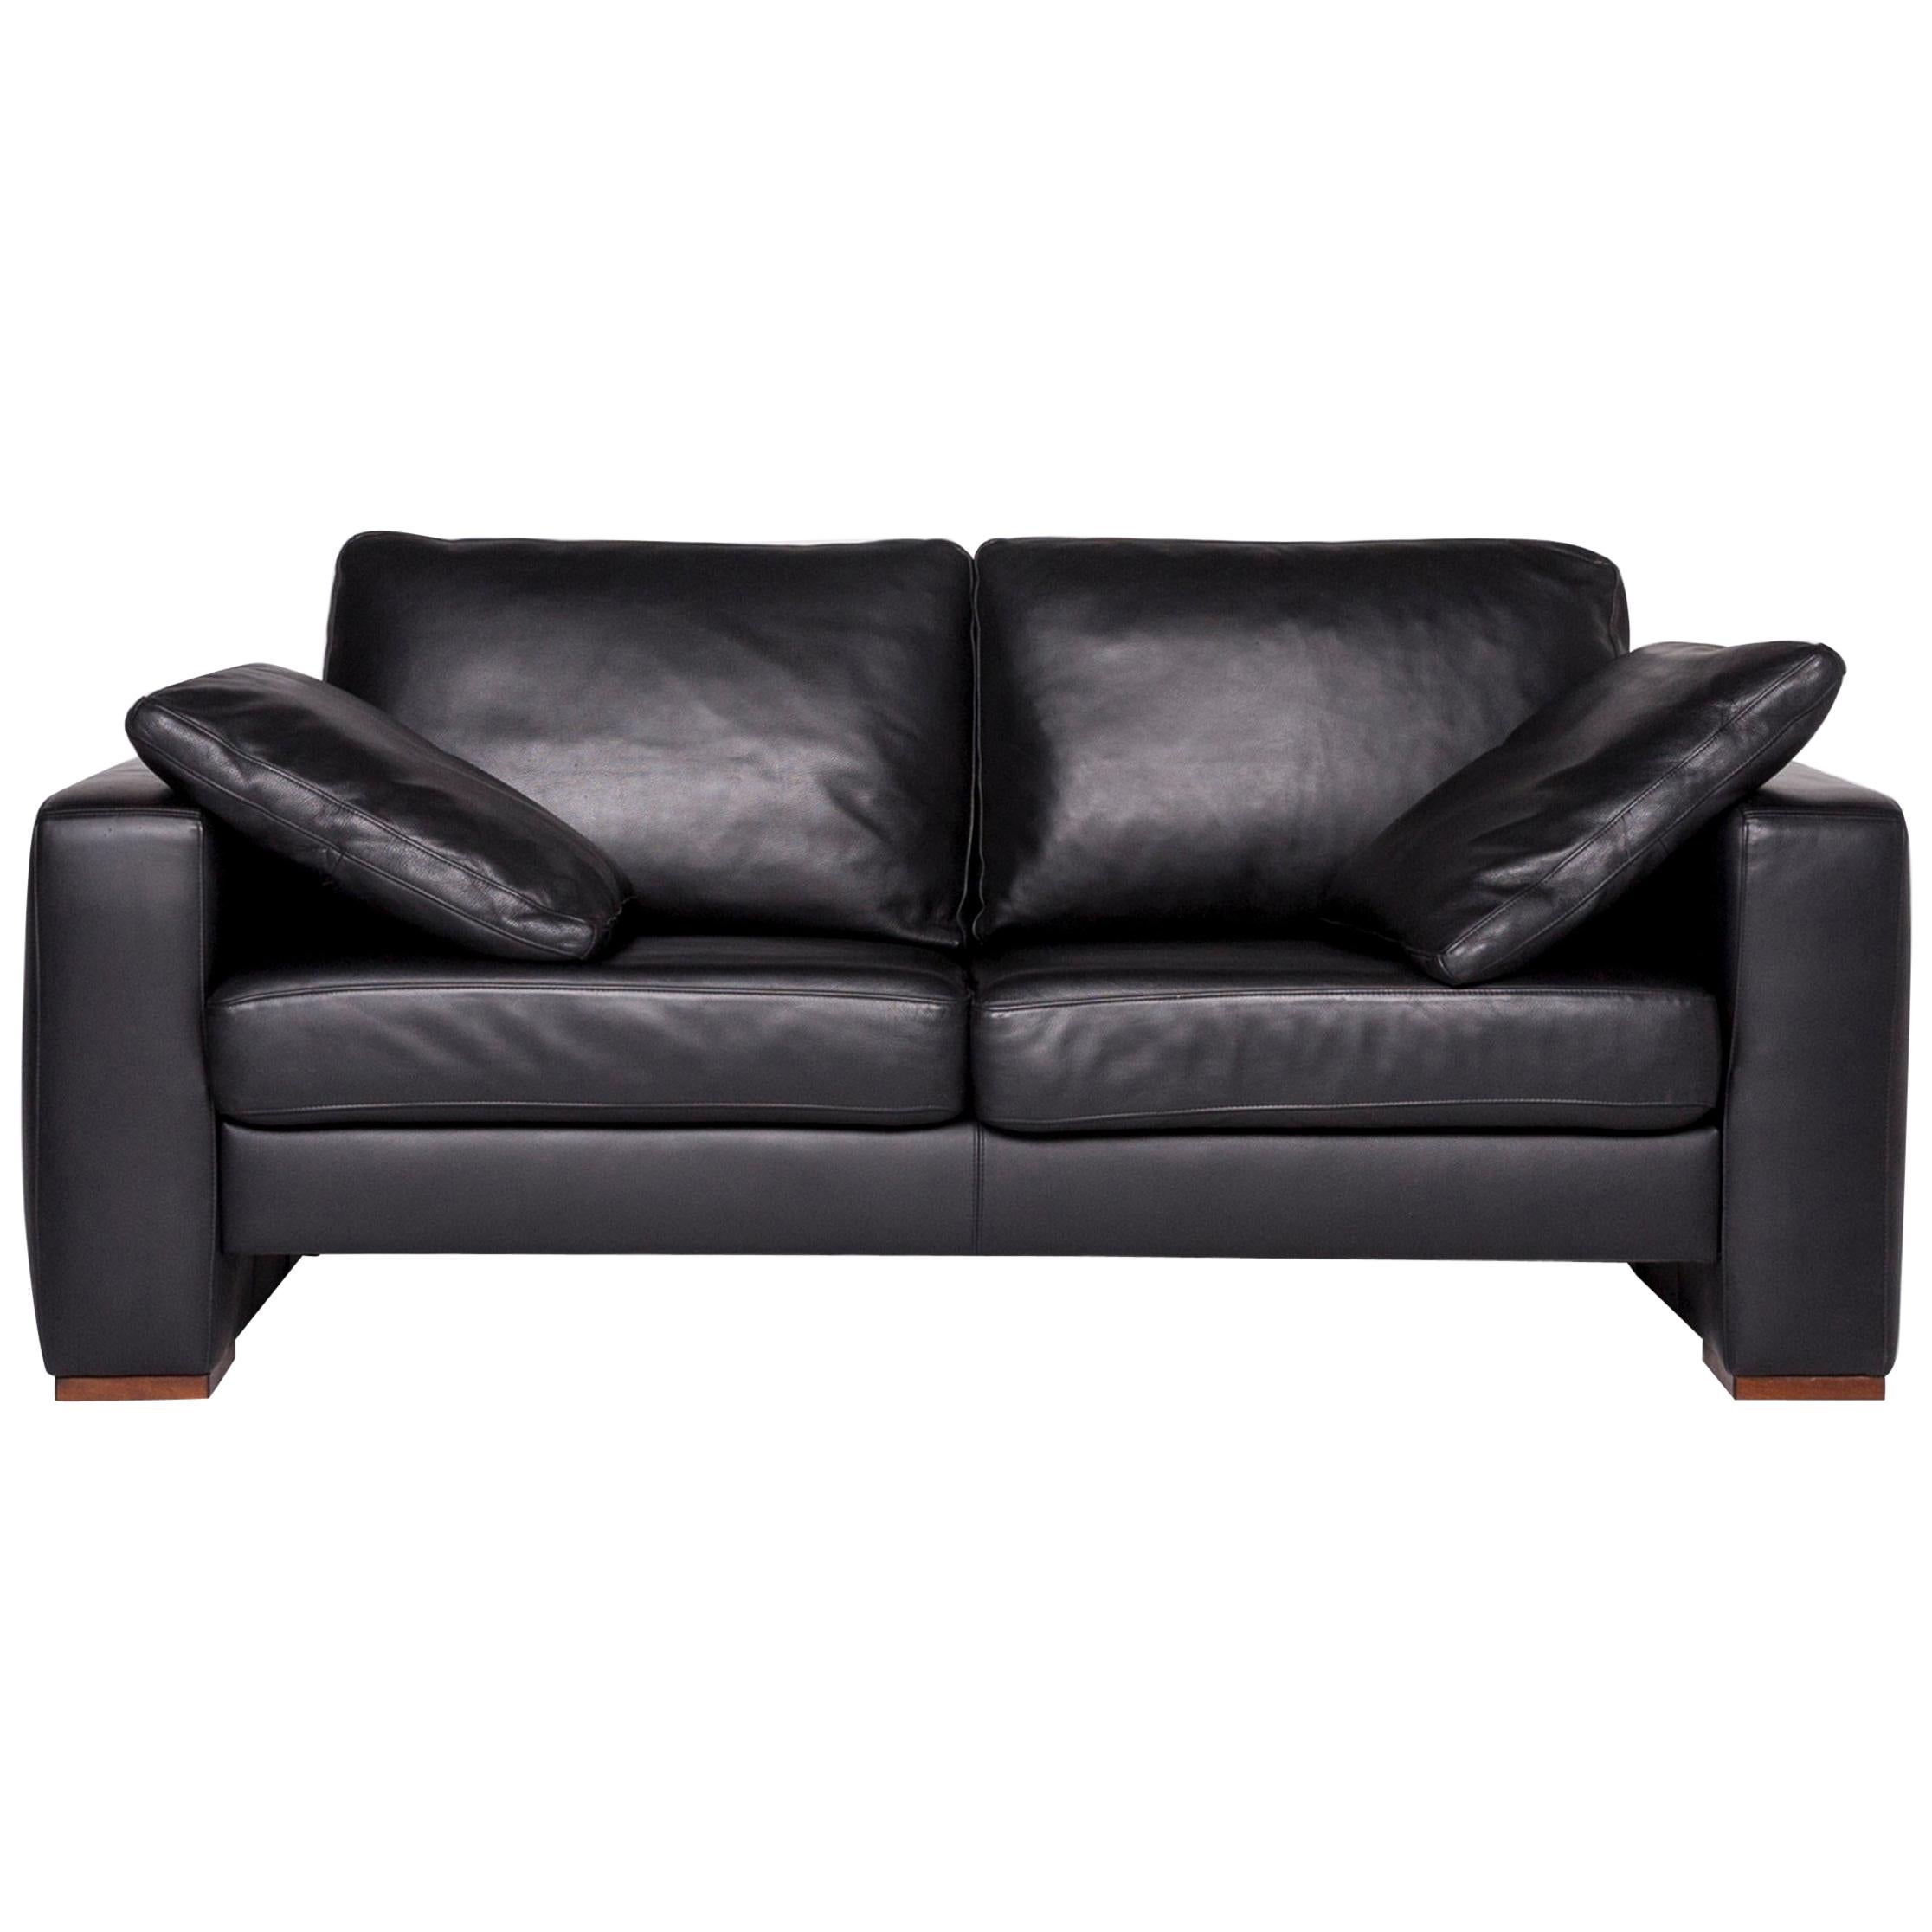 Machalke Designer Leather Sofa Black Two-Seat Couch For Sale